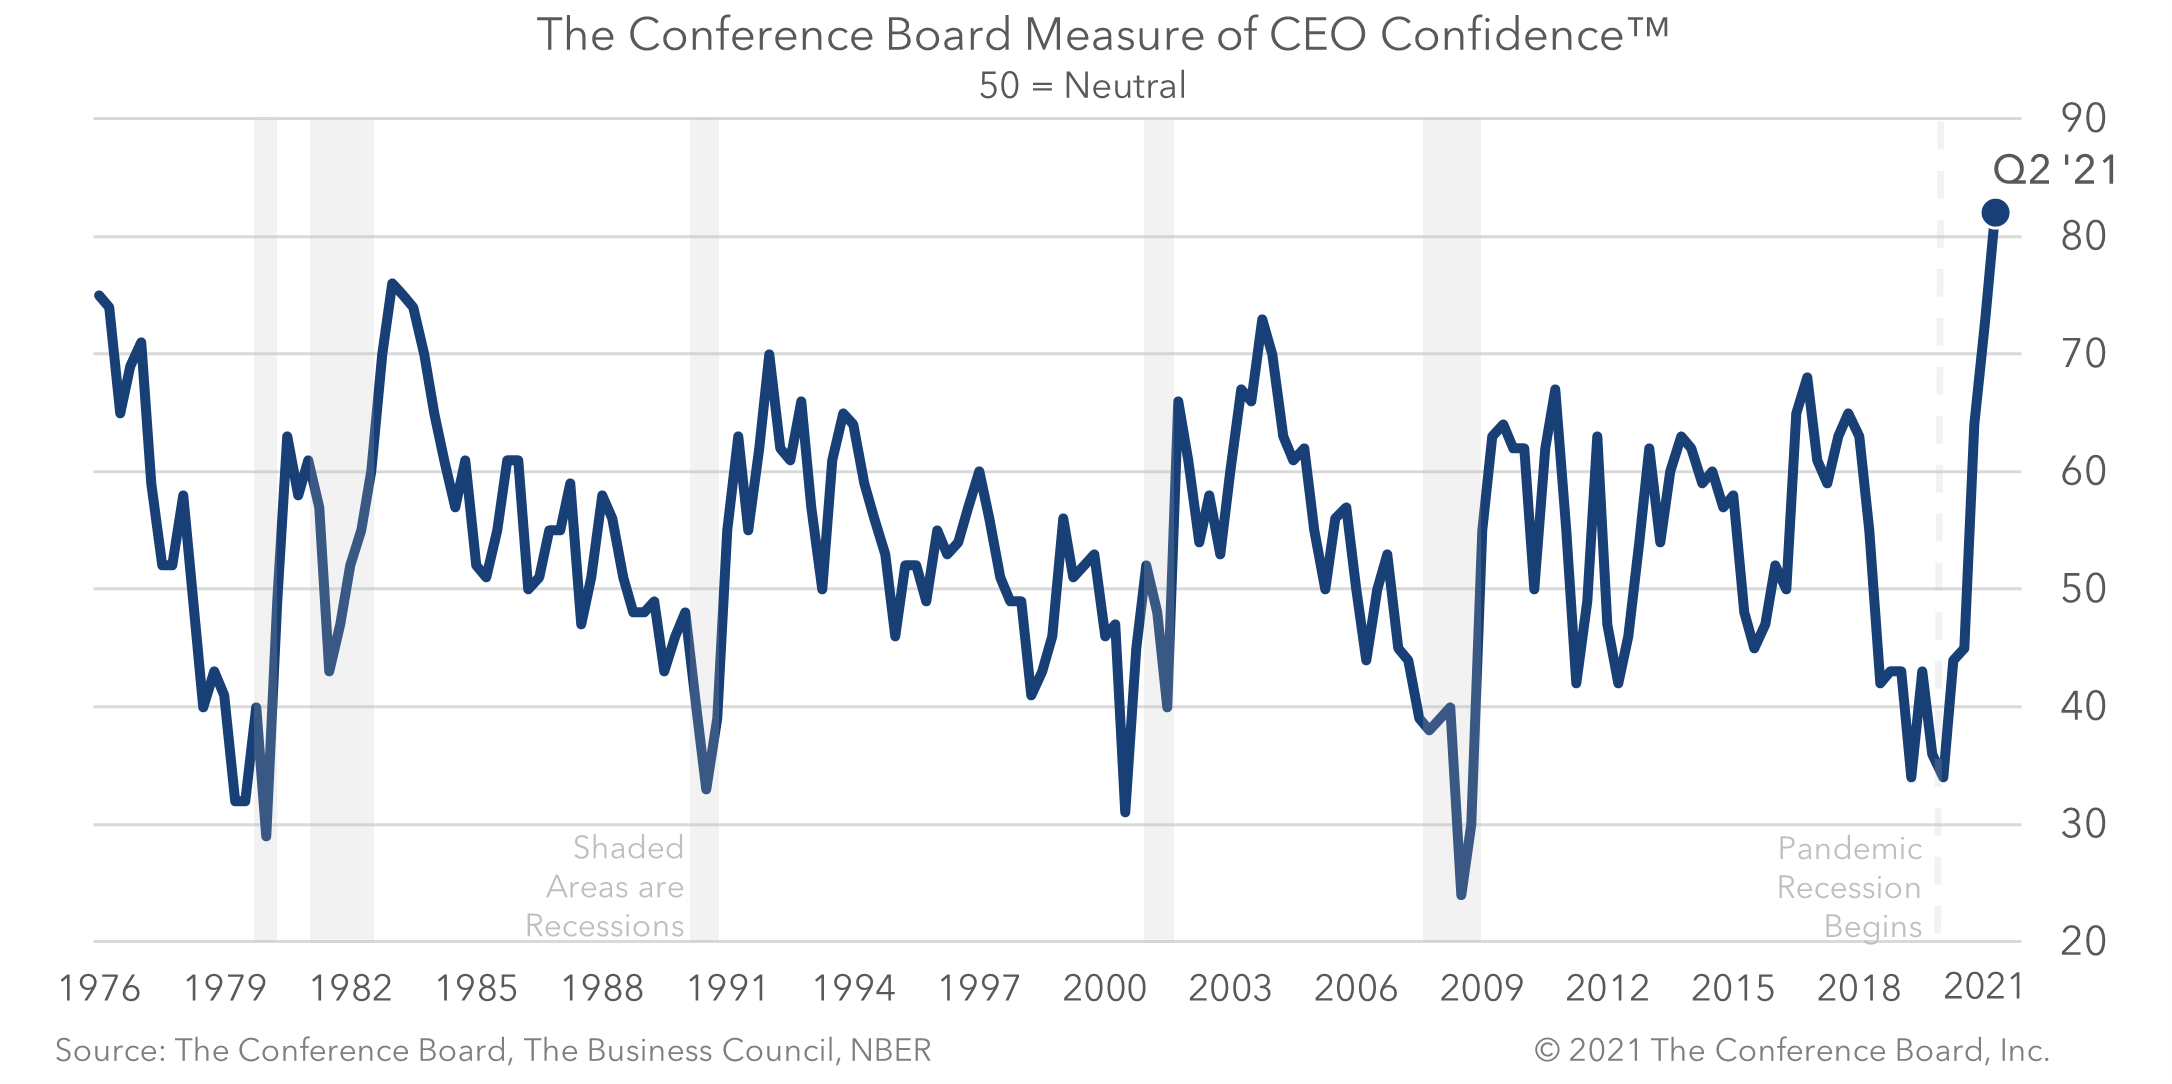 CEO Confidence hit all-time high in Q2